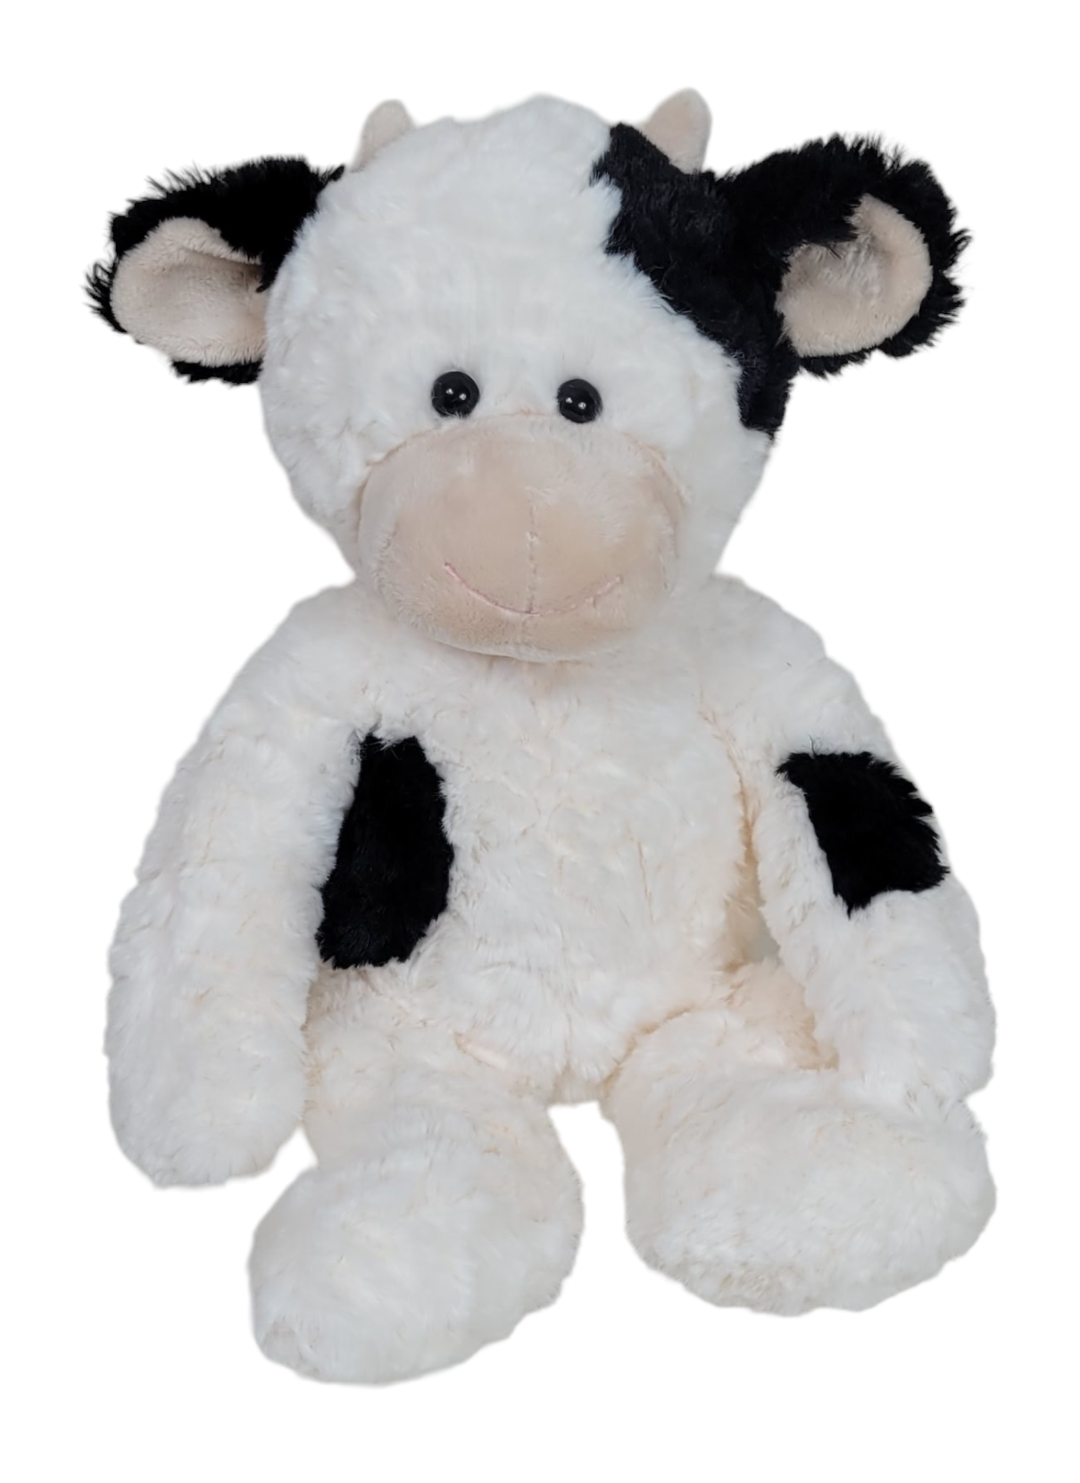 Wilbur the Black and White Cow